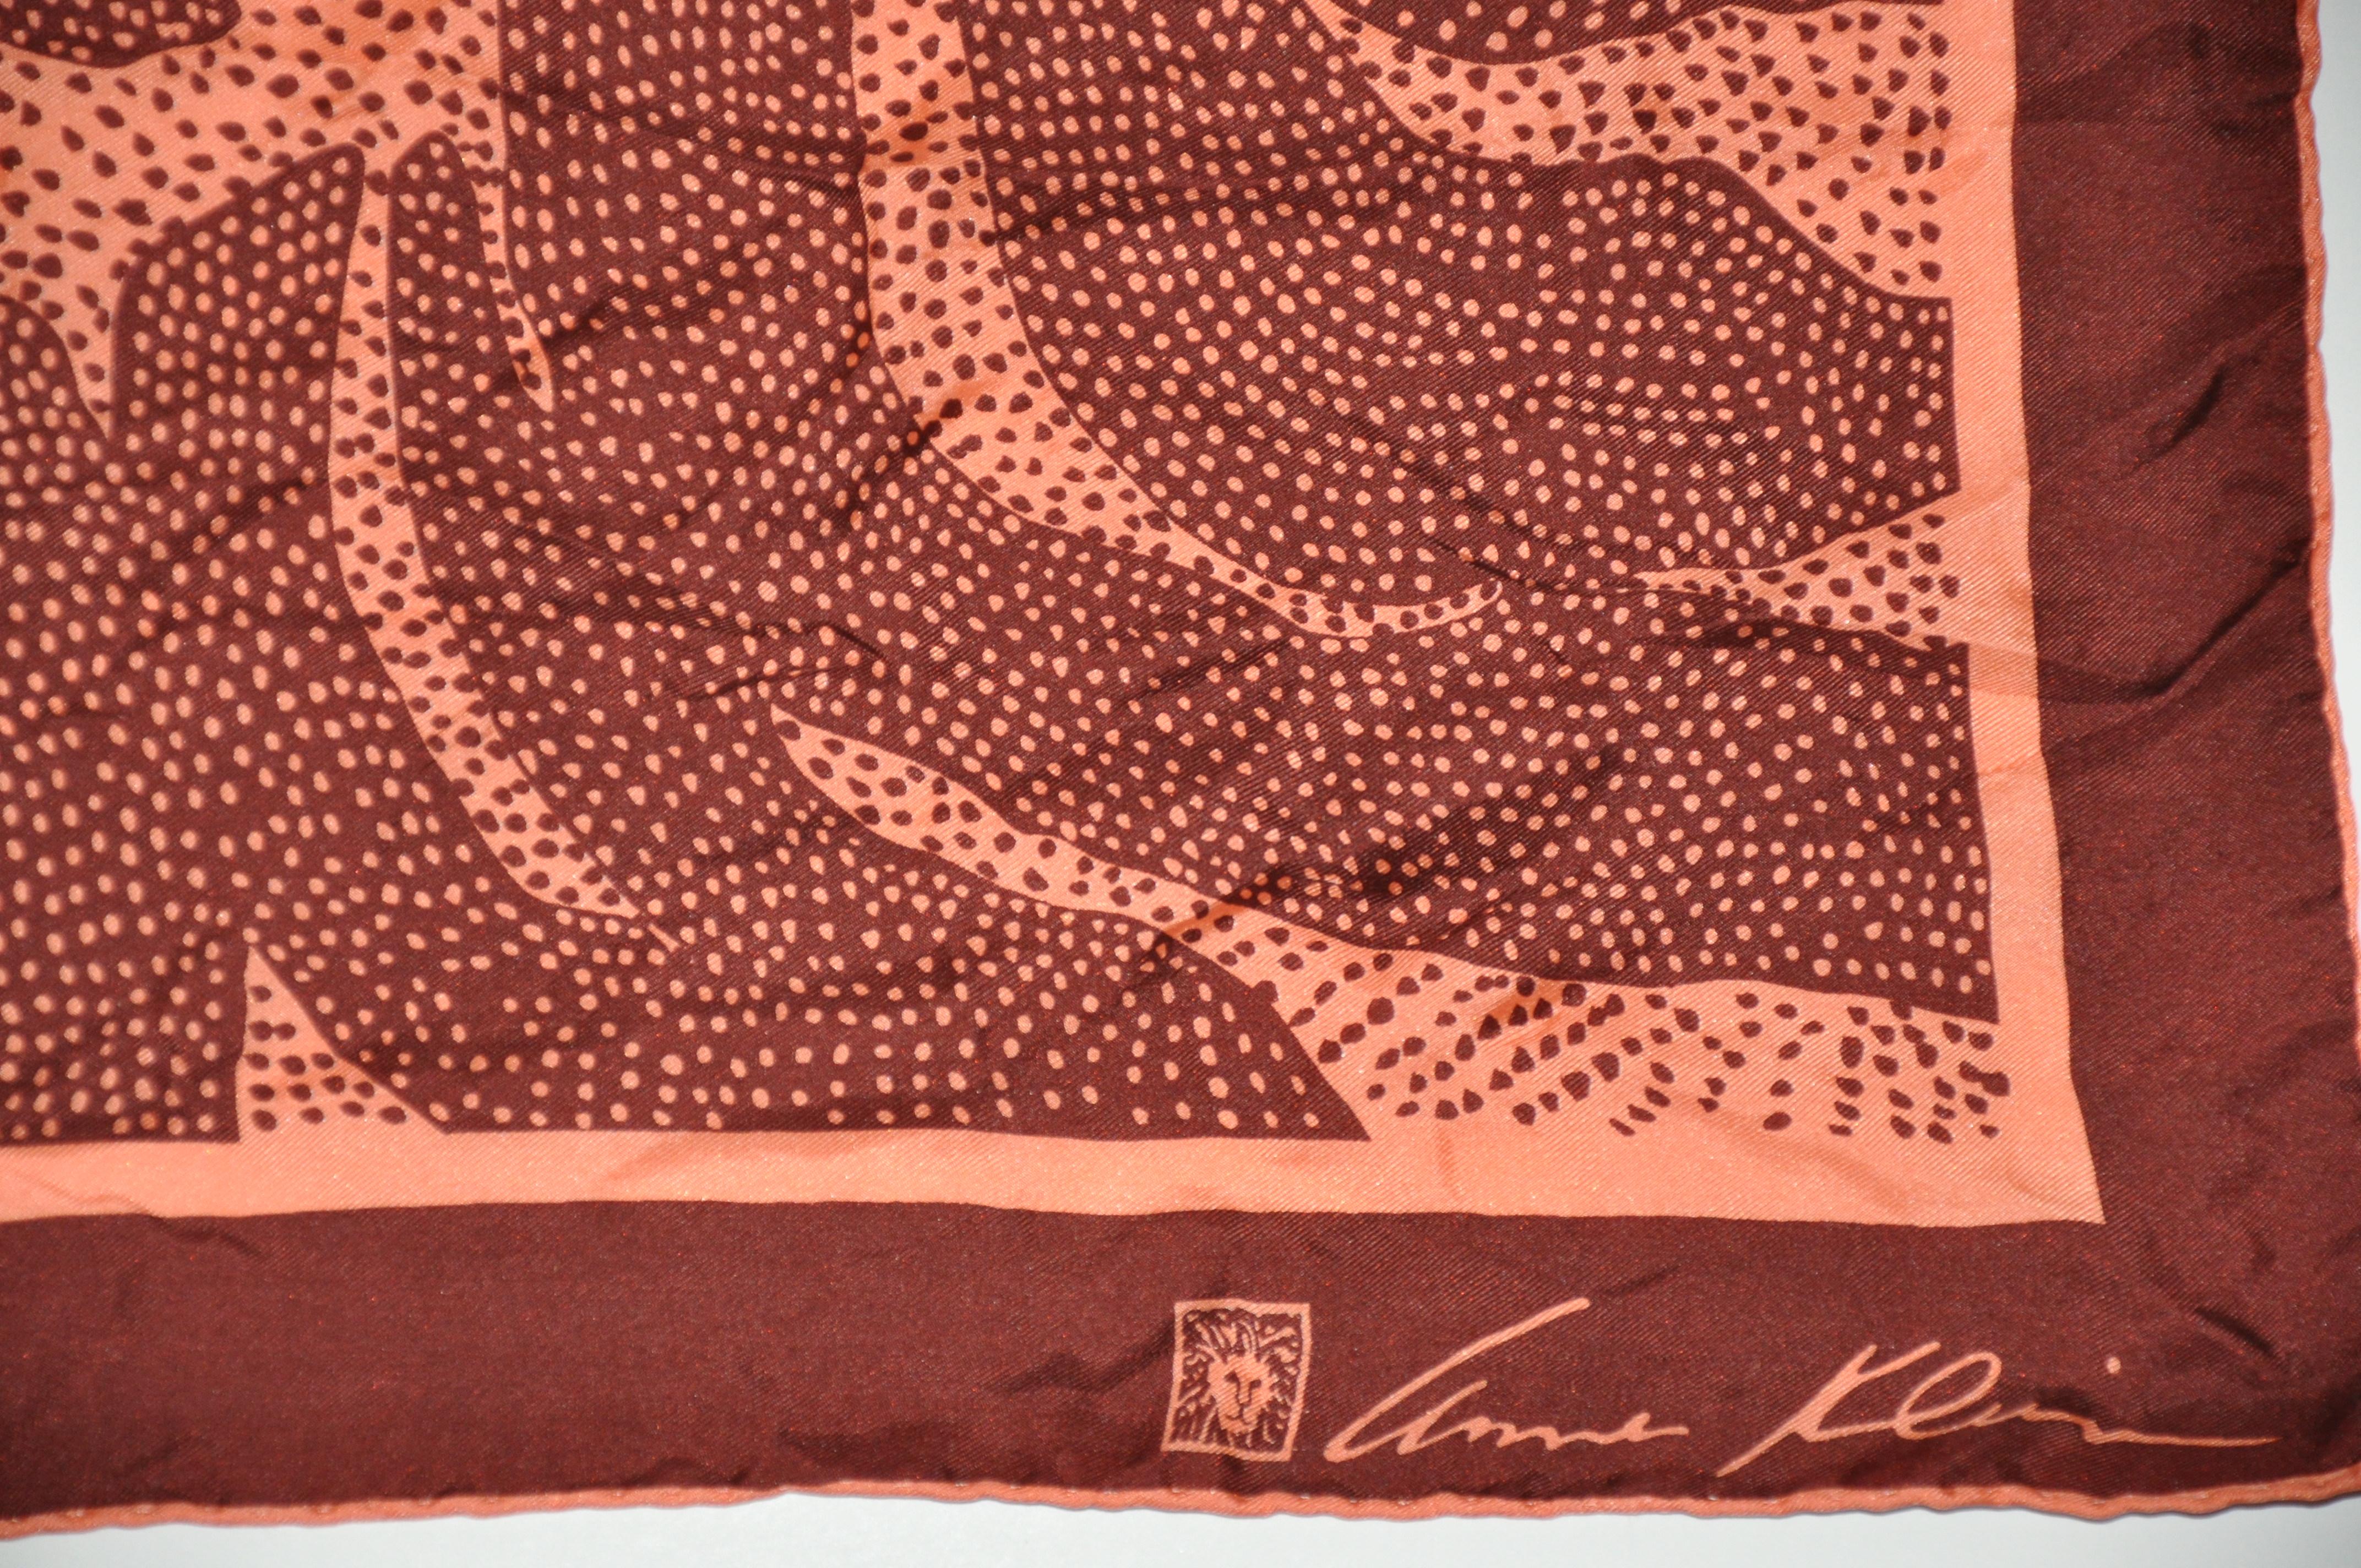      Anne Klein for Robinson & Golluber coral & brown signature logo silk scarf with hand-rolled edges, measures 26 inches by 26 inches. Made in Japan.